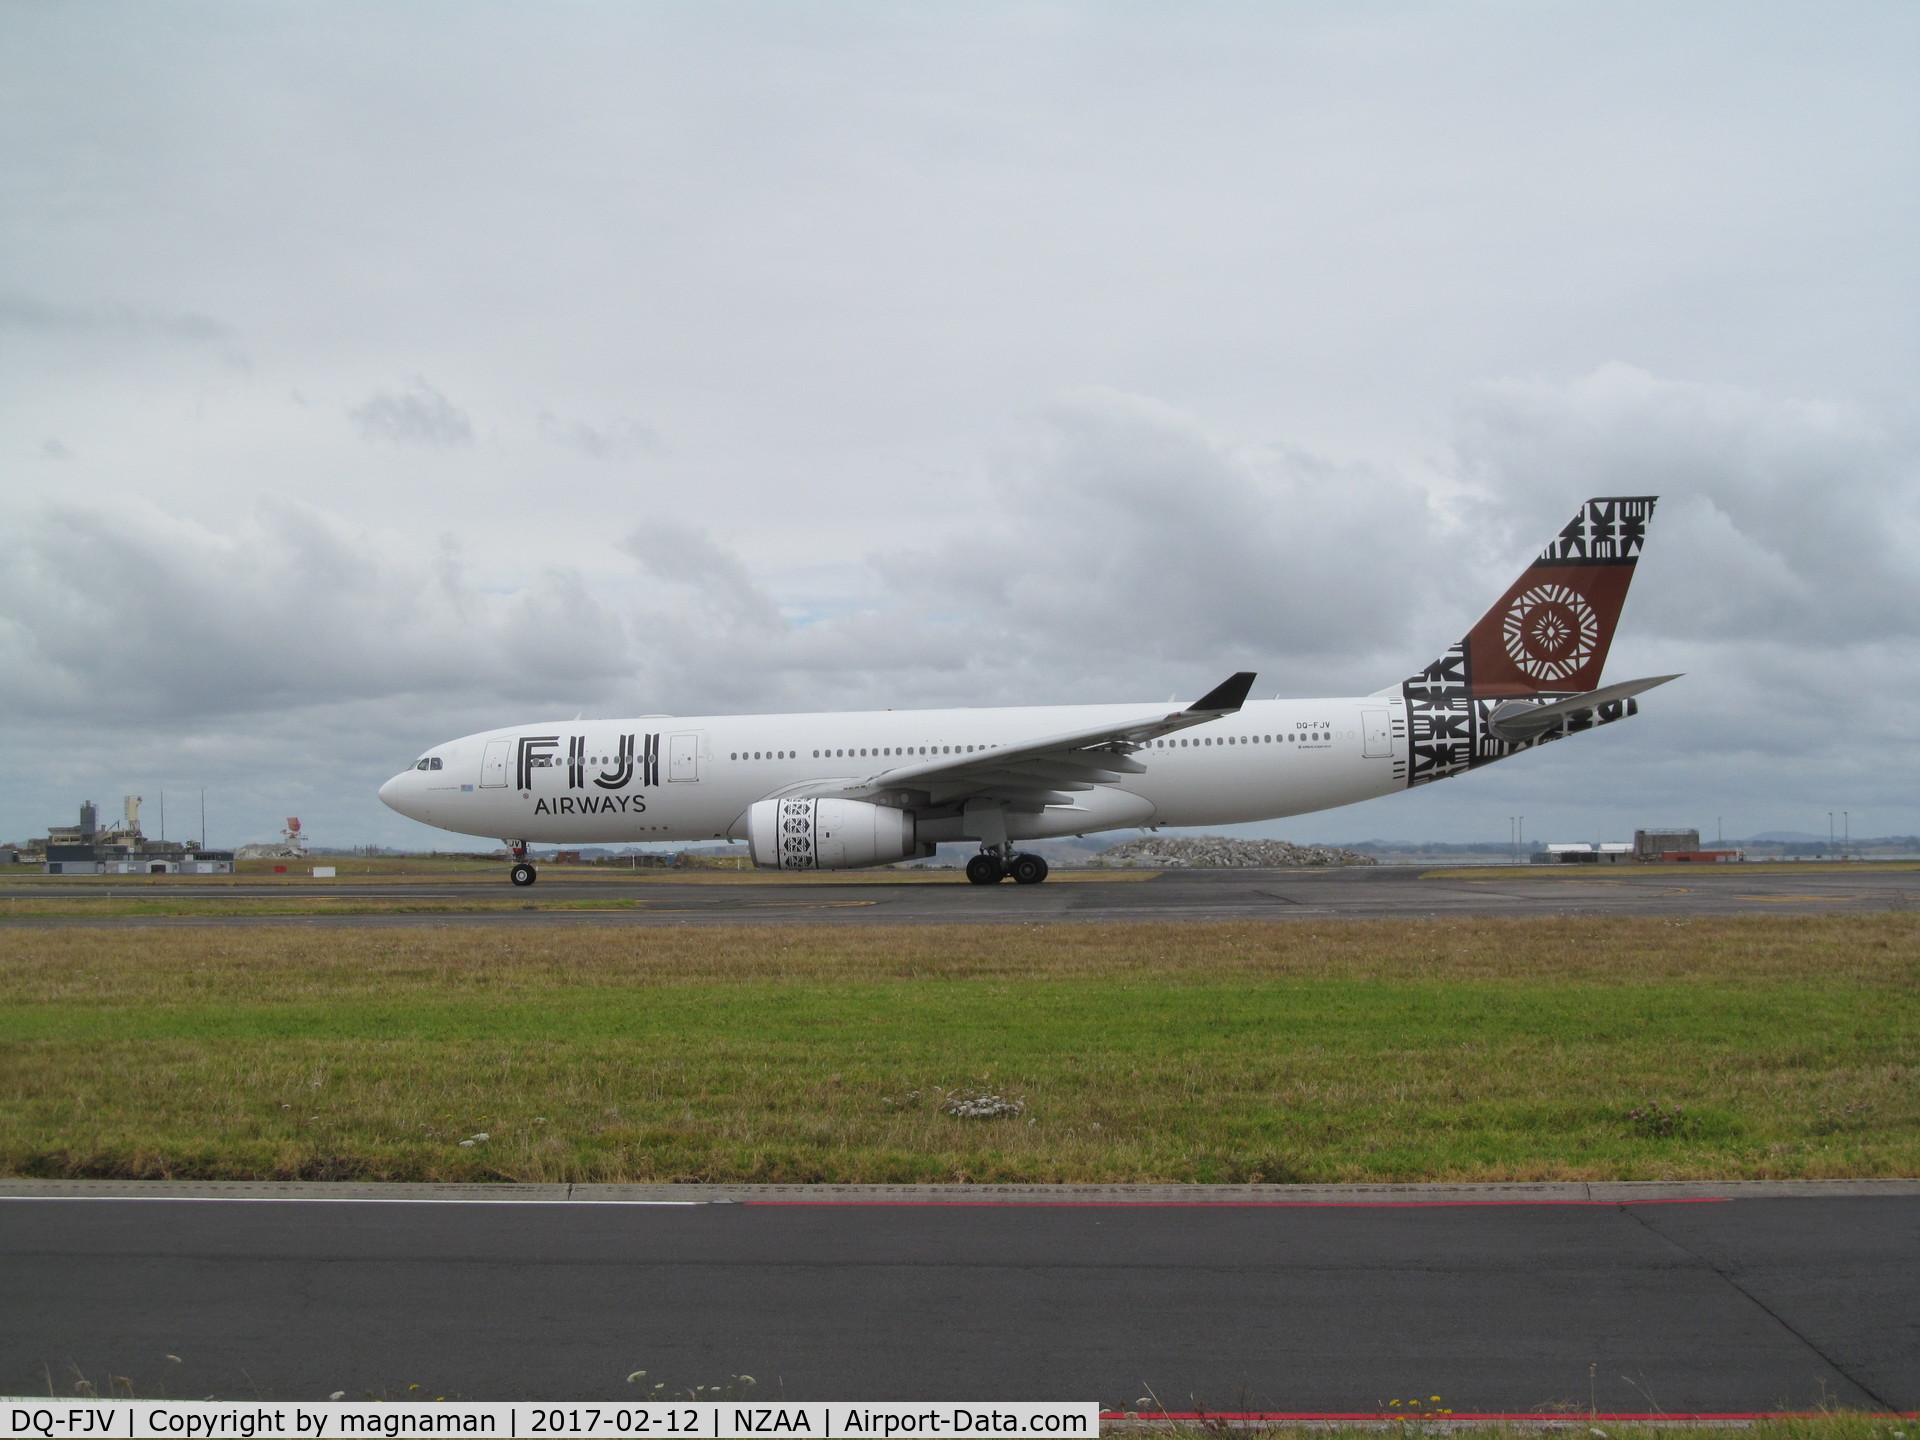 DQ-FJV, 2013 Airbus A330-243 C/N 1465, not every day you see one of these - well actually you do in NZ